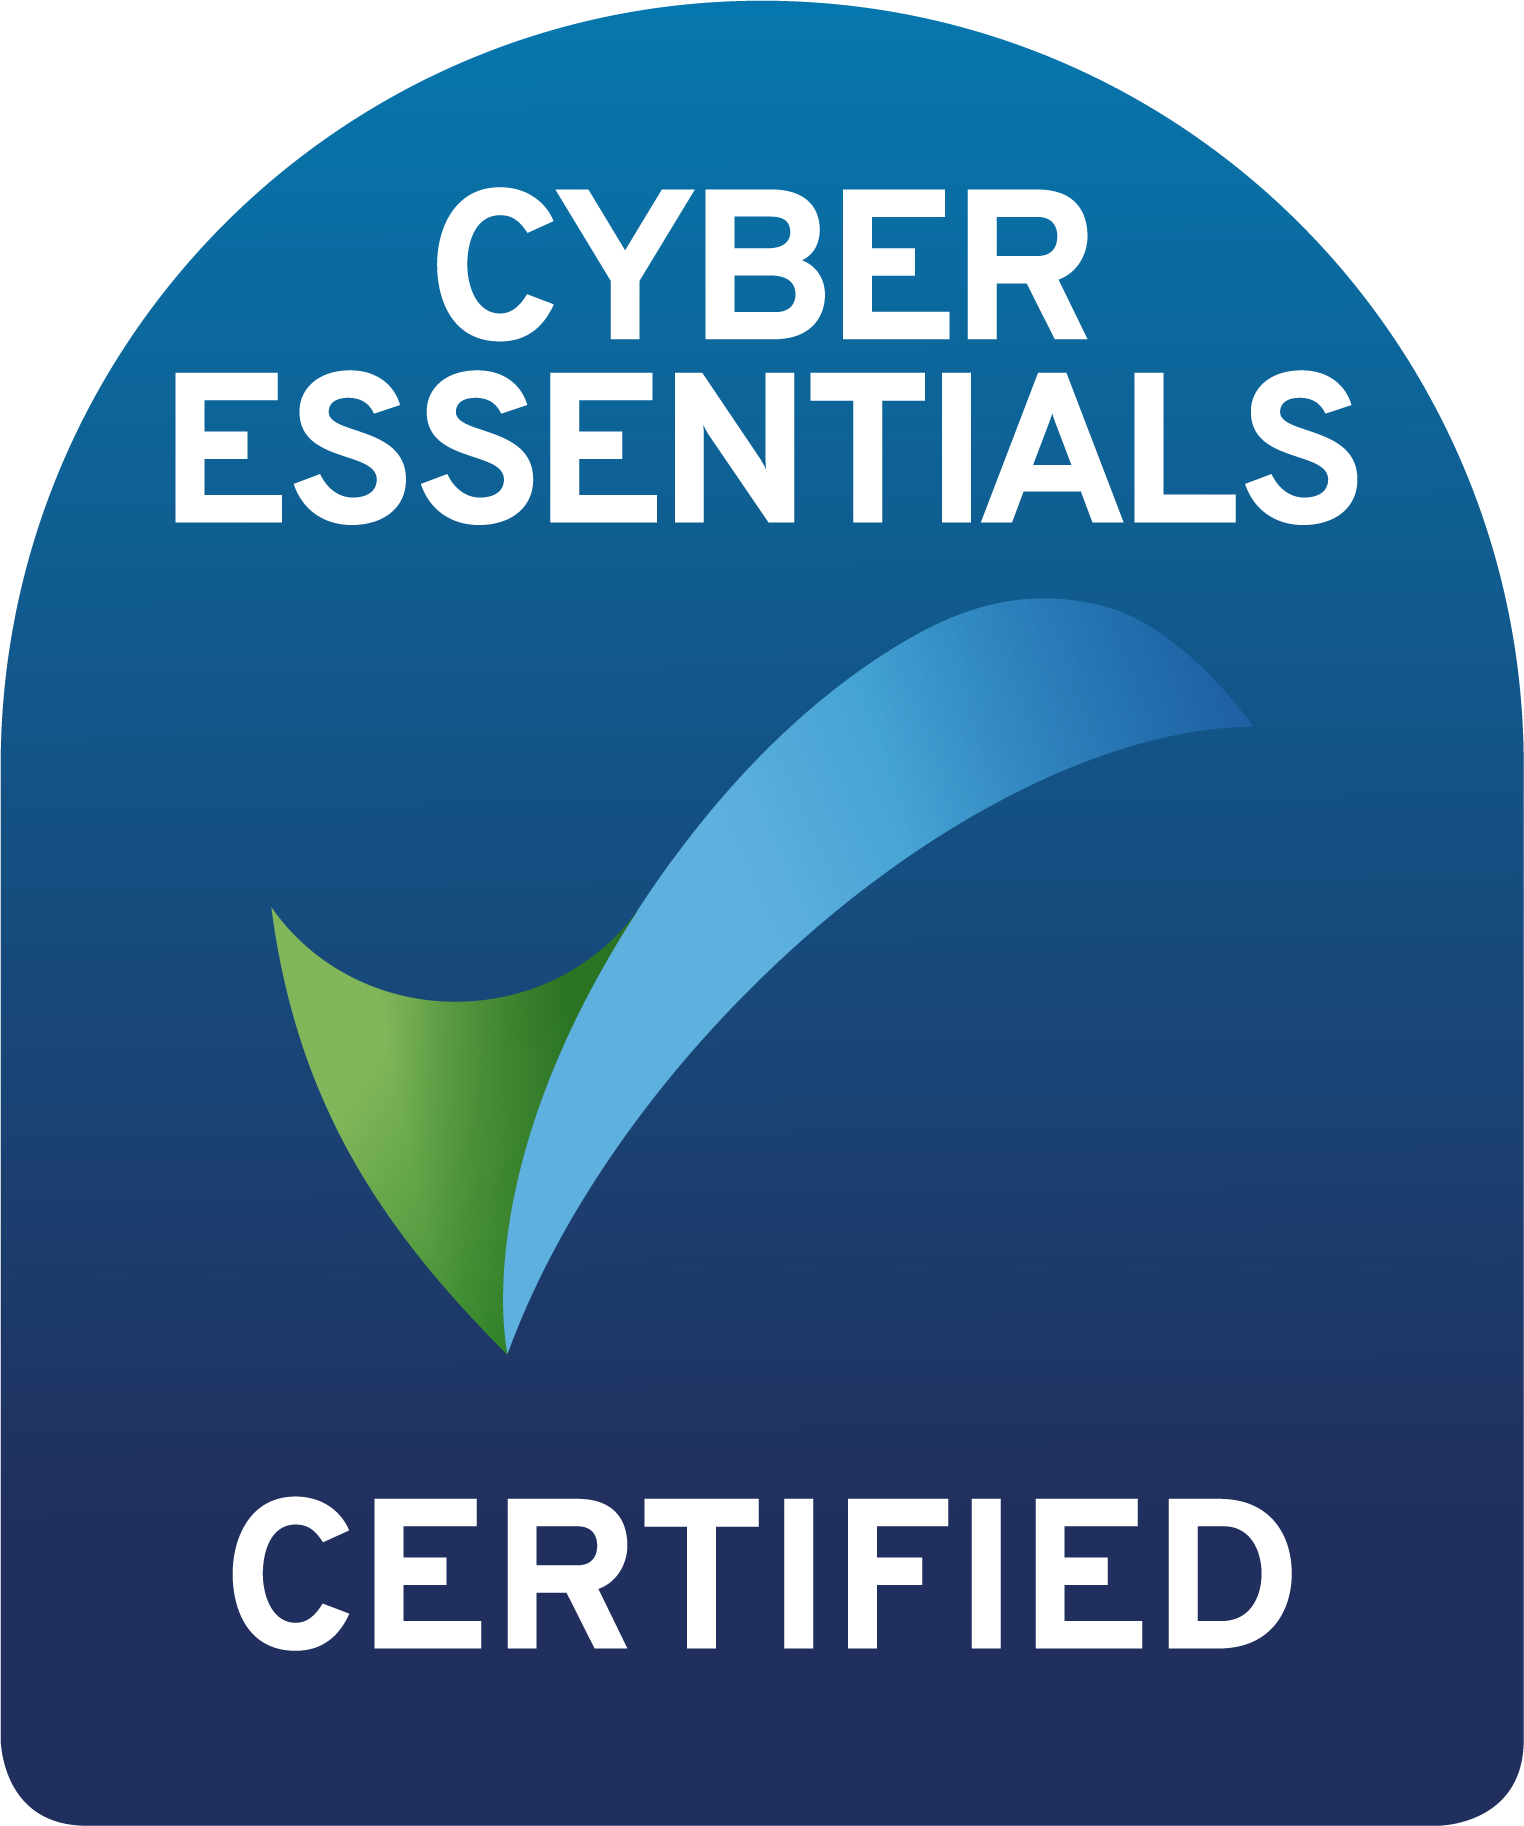 Cyber Essentials Certification - showing our commitment to data security